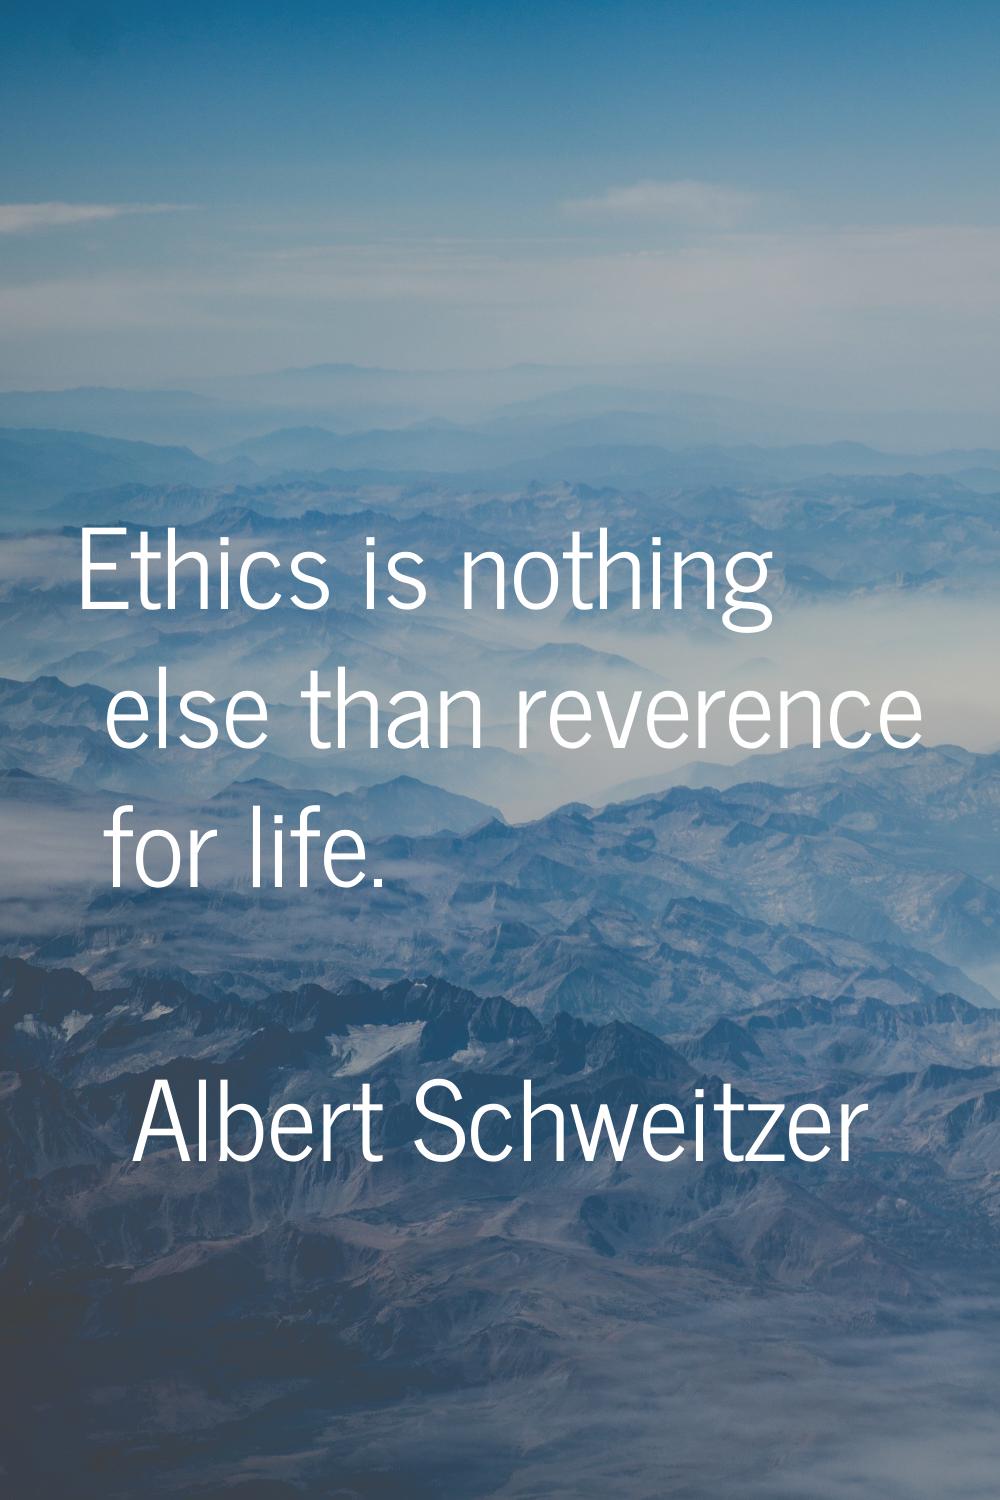 Ethics is nothing else than reverence for life.